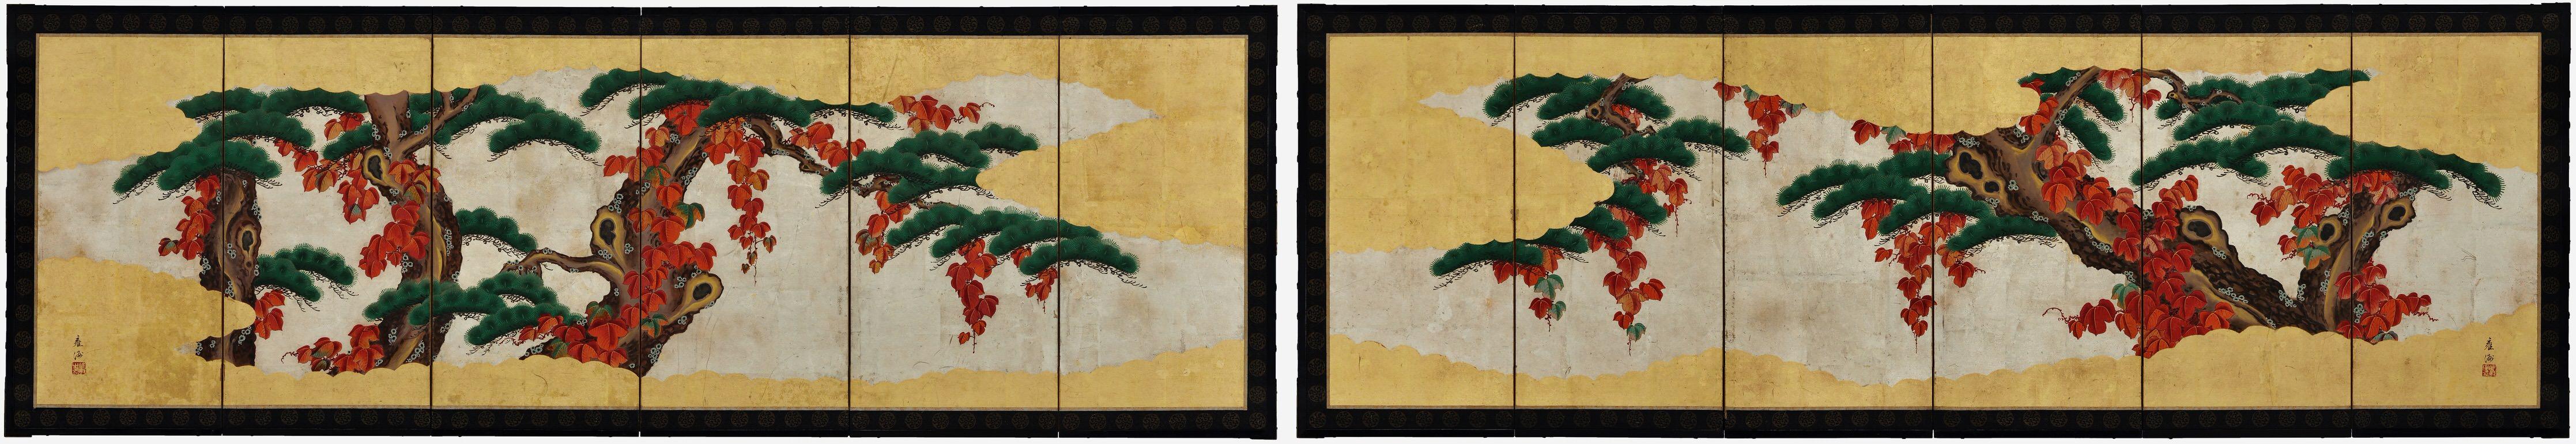 This pair of screens depict just the middle sections of aged pine trees, painted in bold brush strokes on a background of gold leaf clouds. The trees are draped in vines, the lush crimson and orange hues indicating autumn. The vibrant green needles